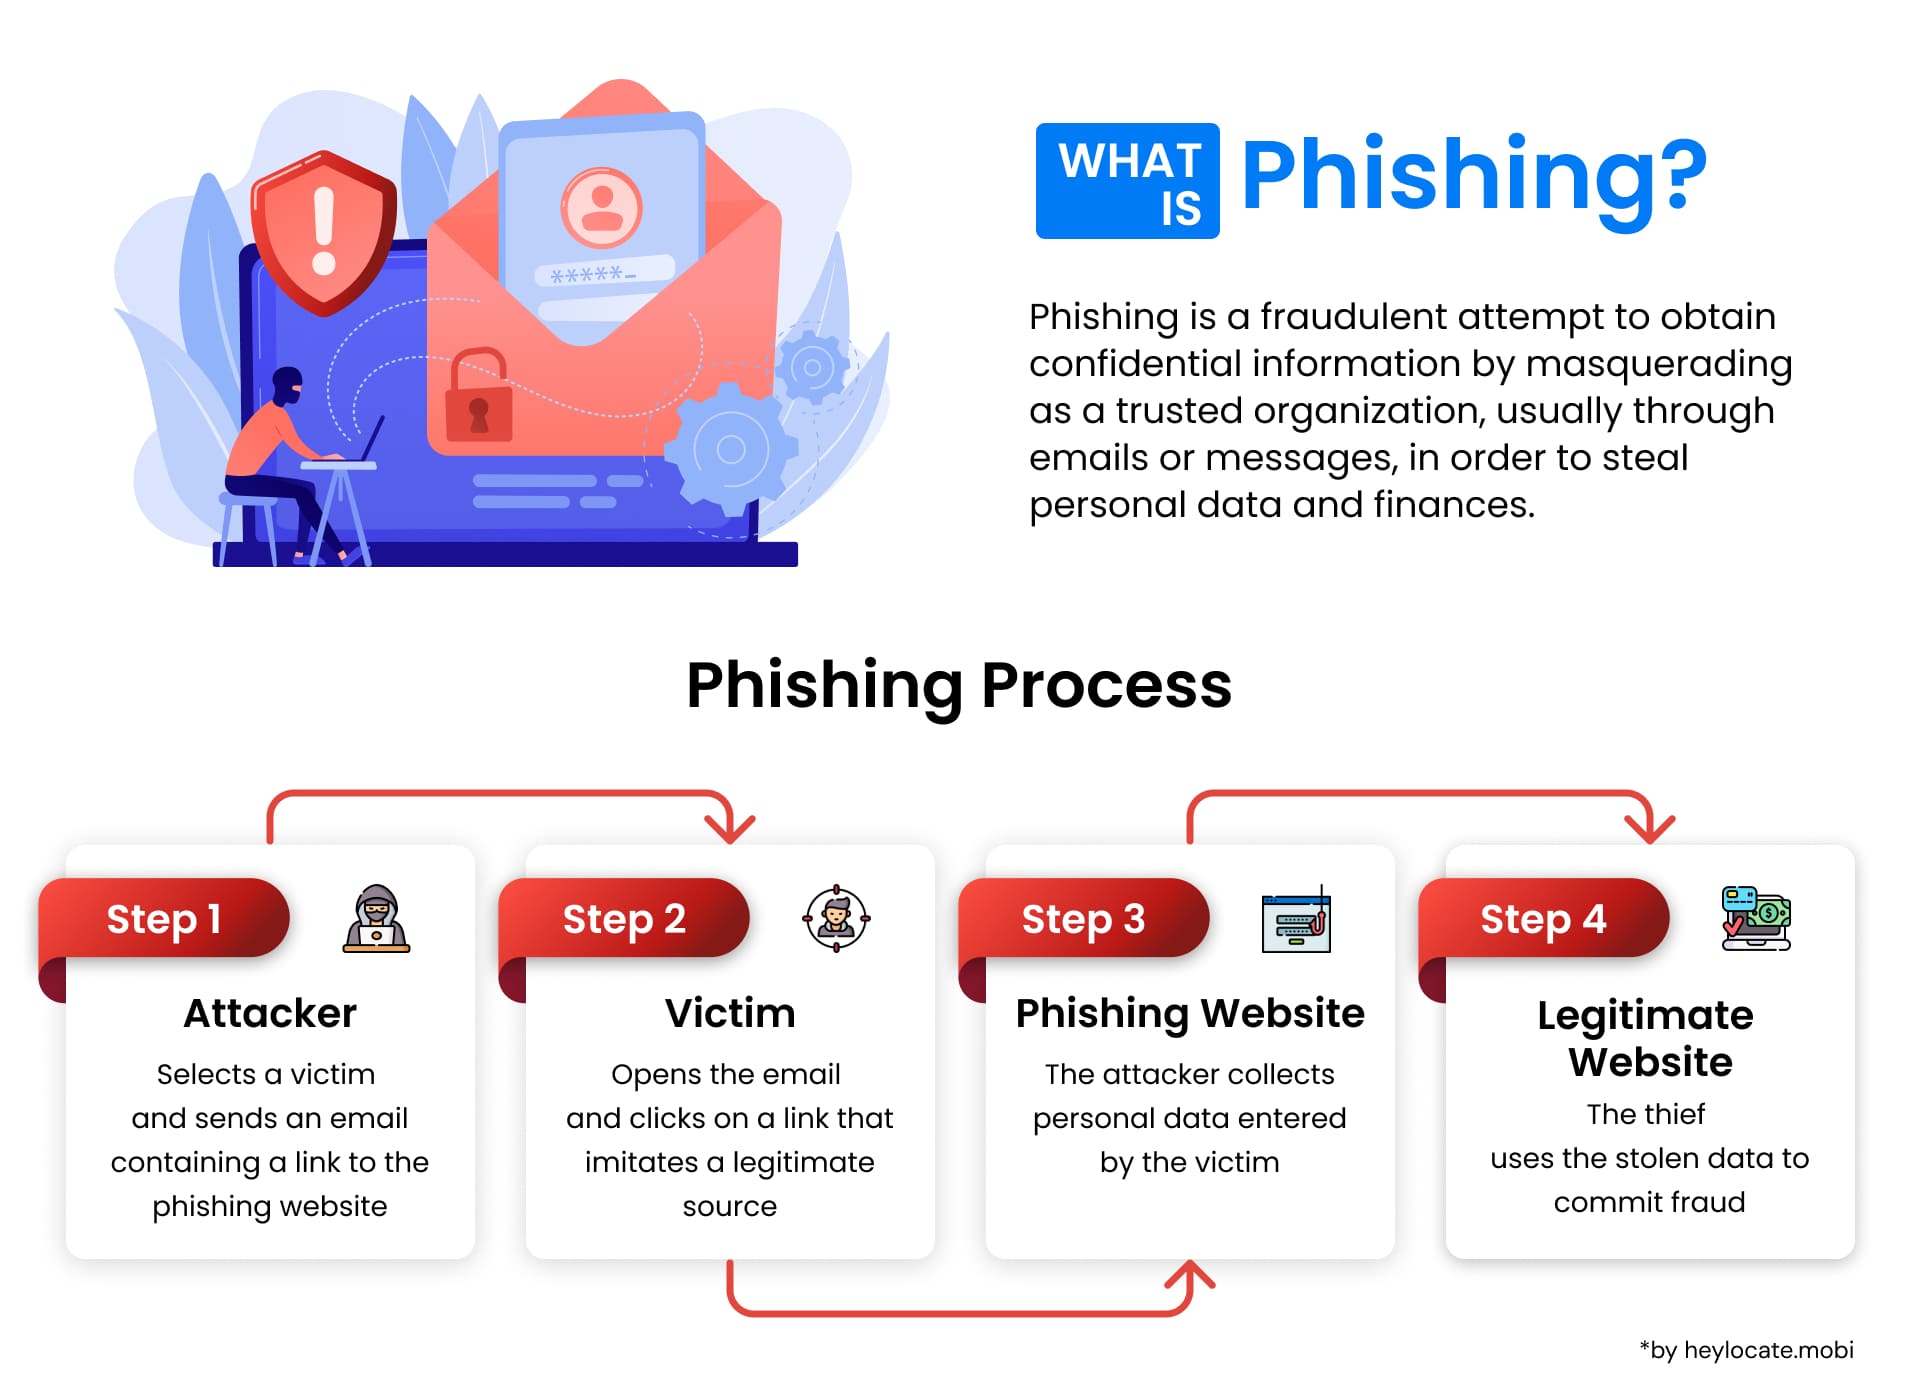 An infographic describing what phishing is and a step-by-step breakdown of how a phishing attack unfolds, from the attacker's perspective to the victim's actions.